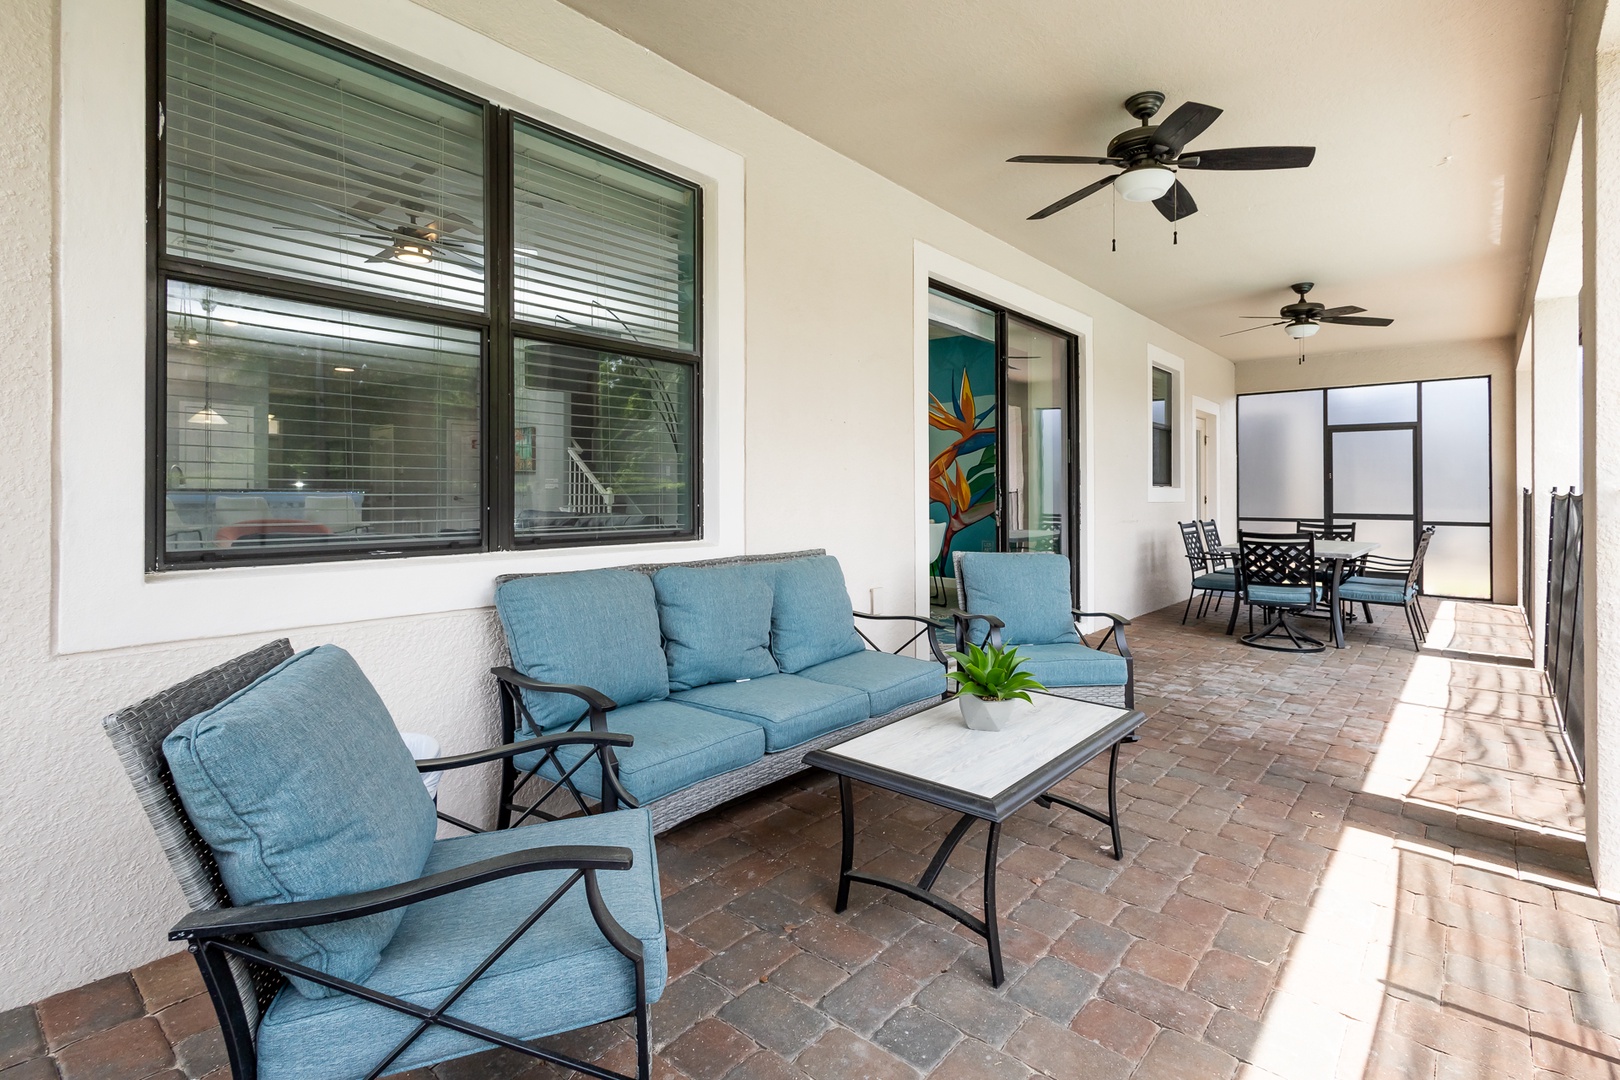 Back patio with outdoor furniture